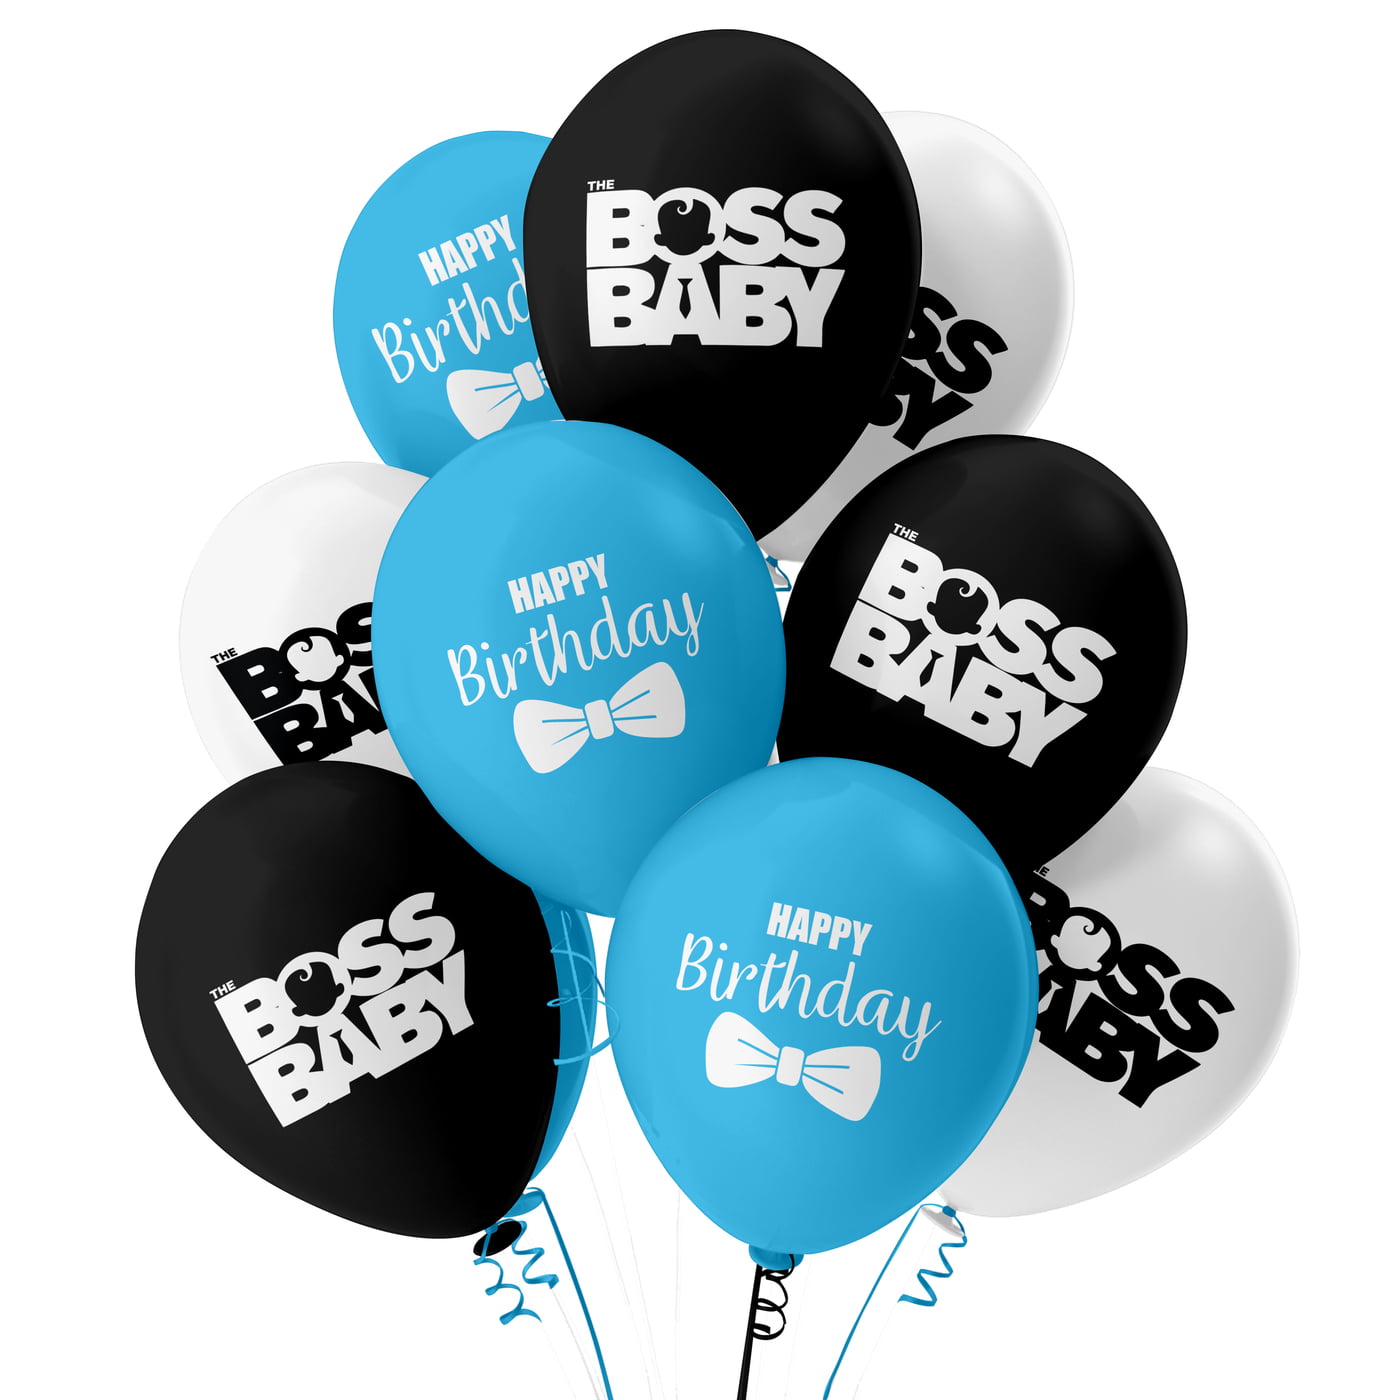 The Magic Balloons-Boss Baby Happy Birthday Balloons for Party Décor with Blue, White & black balloons. Boss Baby Happy Birthday latex balloons for Birthday Decoration/Party Supplies-Pack of 30 pcs